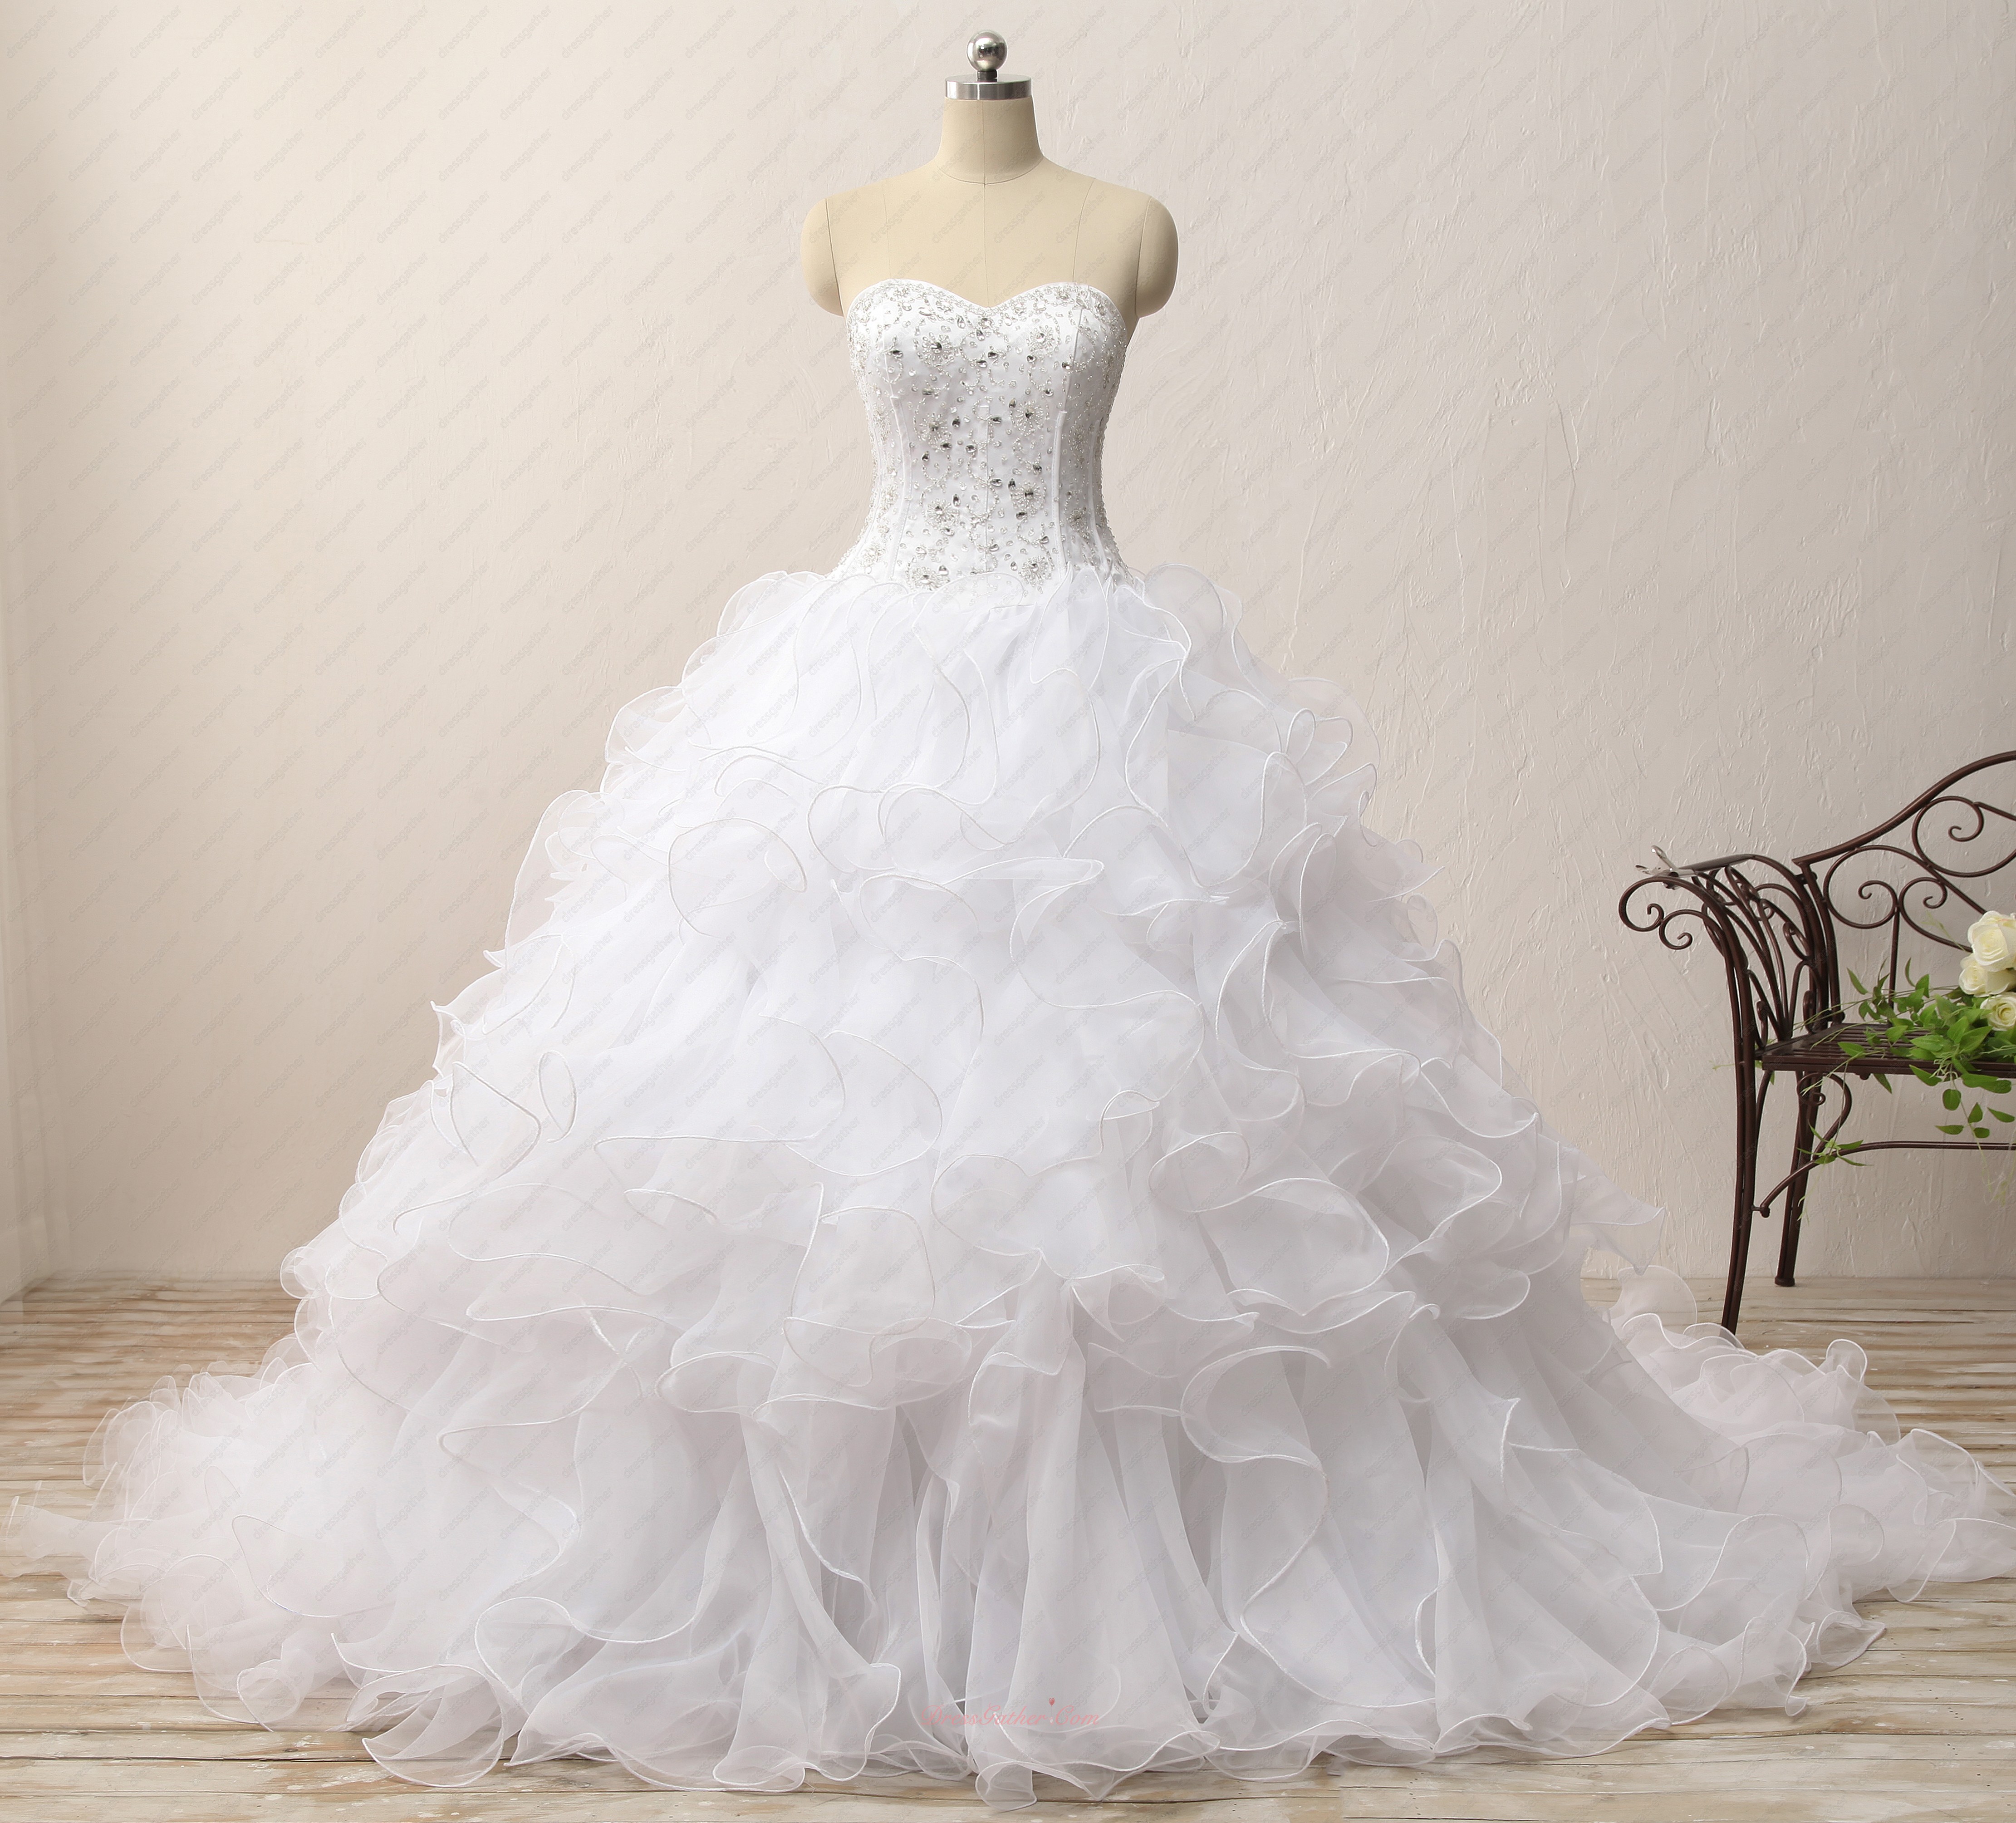 Wavy Waterfalls Skirt Chapel Train Court Destination White Wedding Gowns Promotion - Click Image to Close